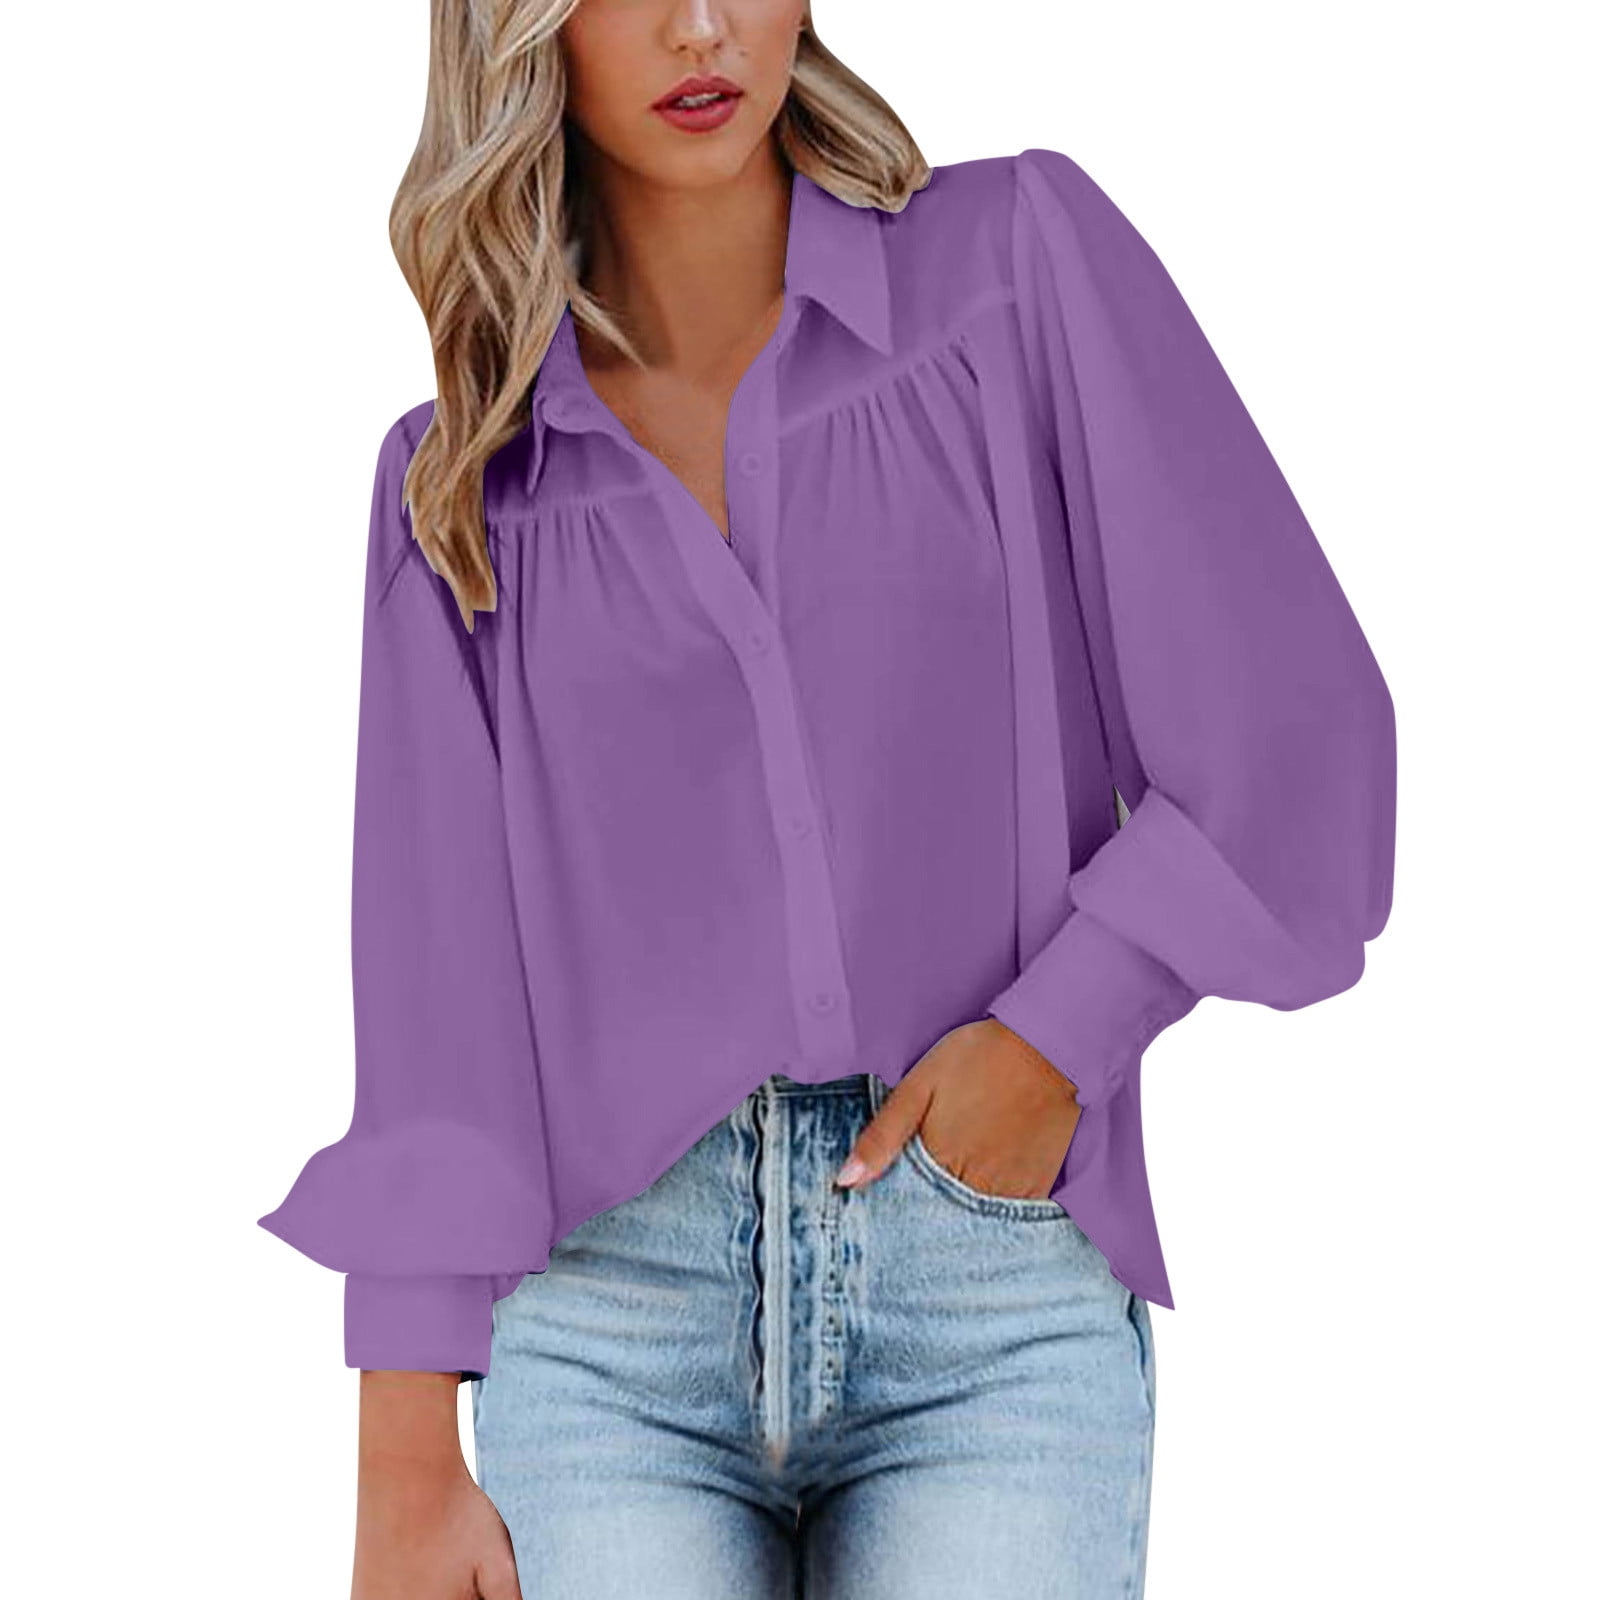 adviicd Button-Down Shirts For Women Summer Blouses For